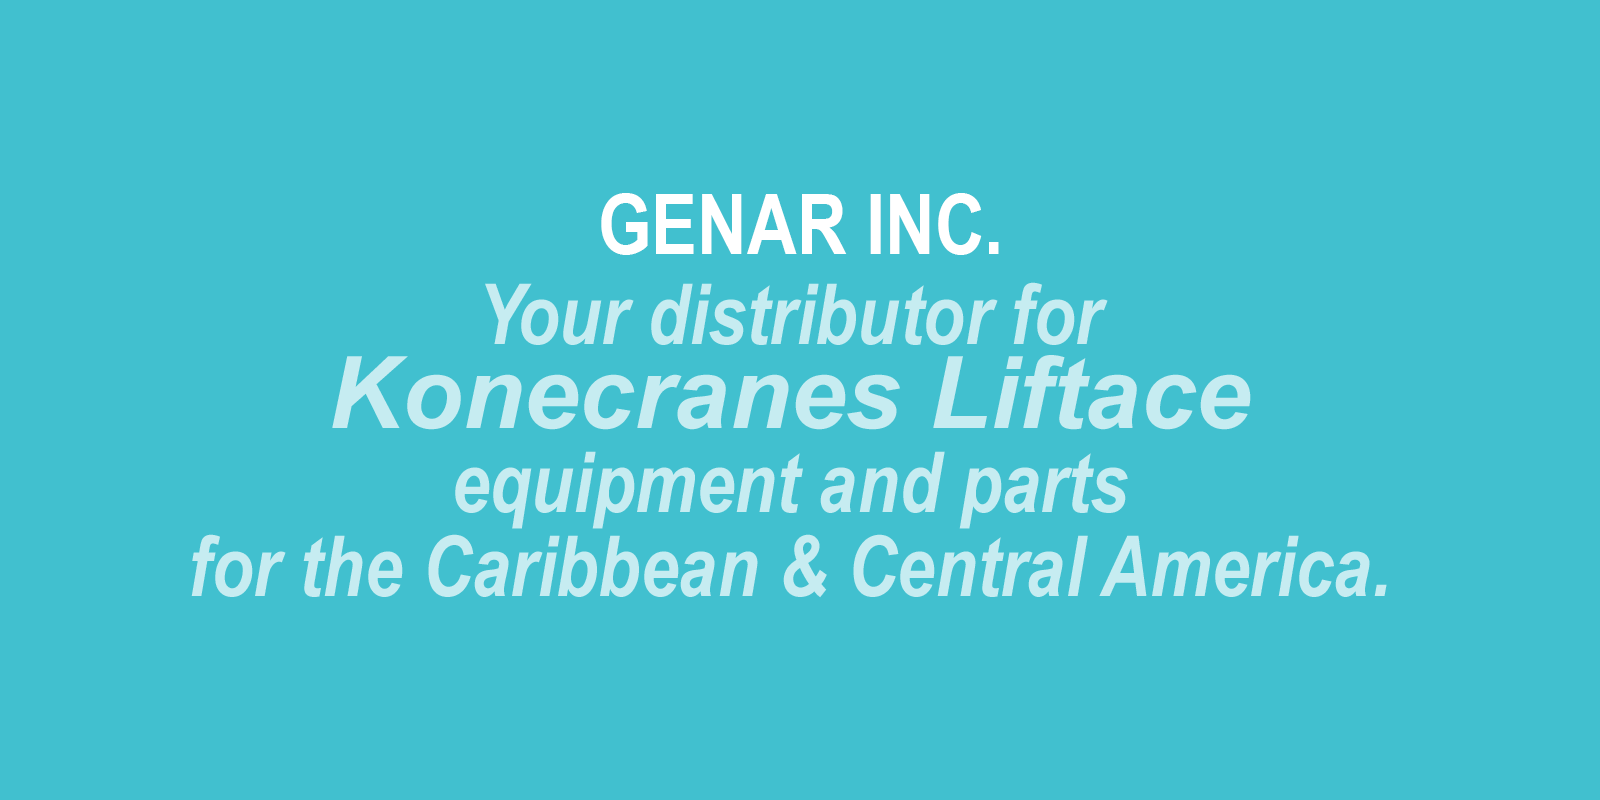 Genar, your distributor Konecranes Liftace equipment and parts for the Caribbean & Central America